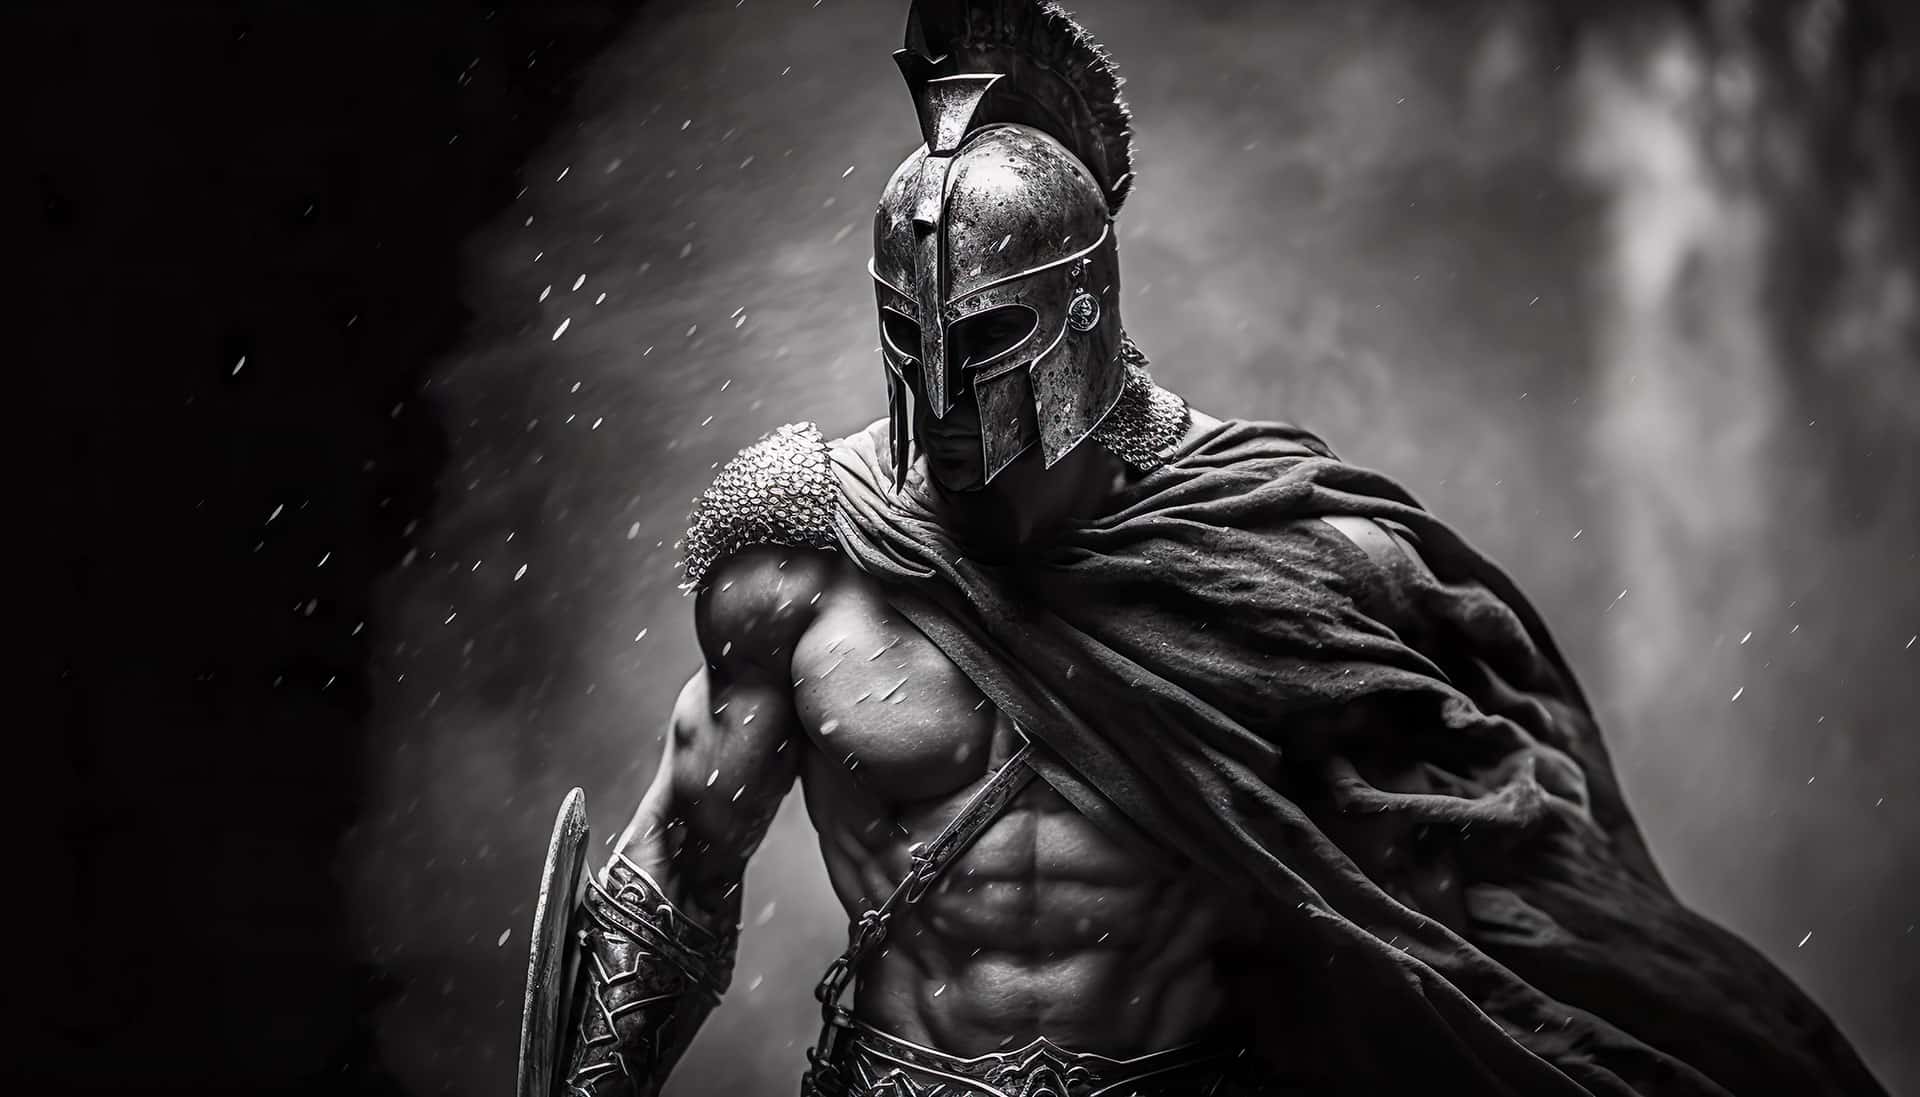 Spartan warrior with well-defined abdominal muscles